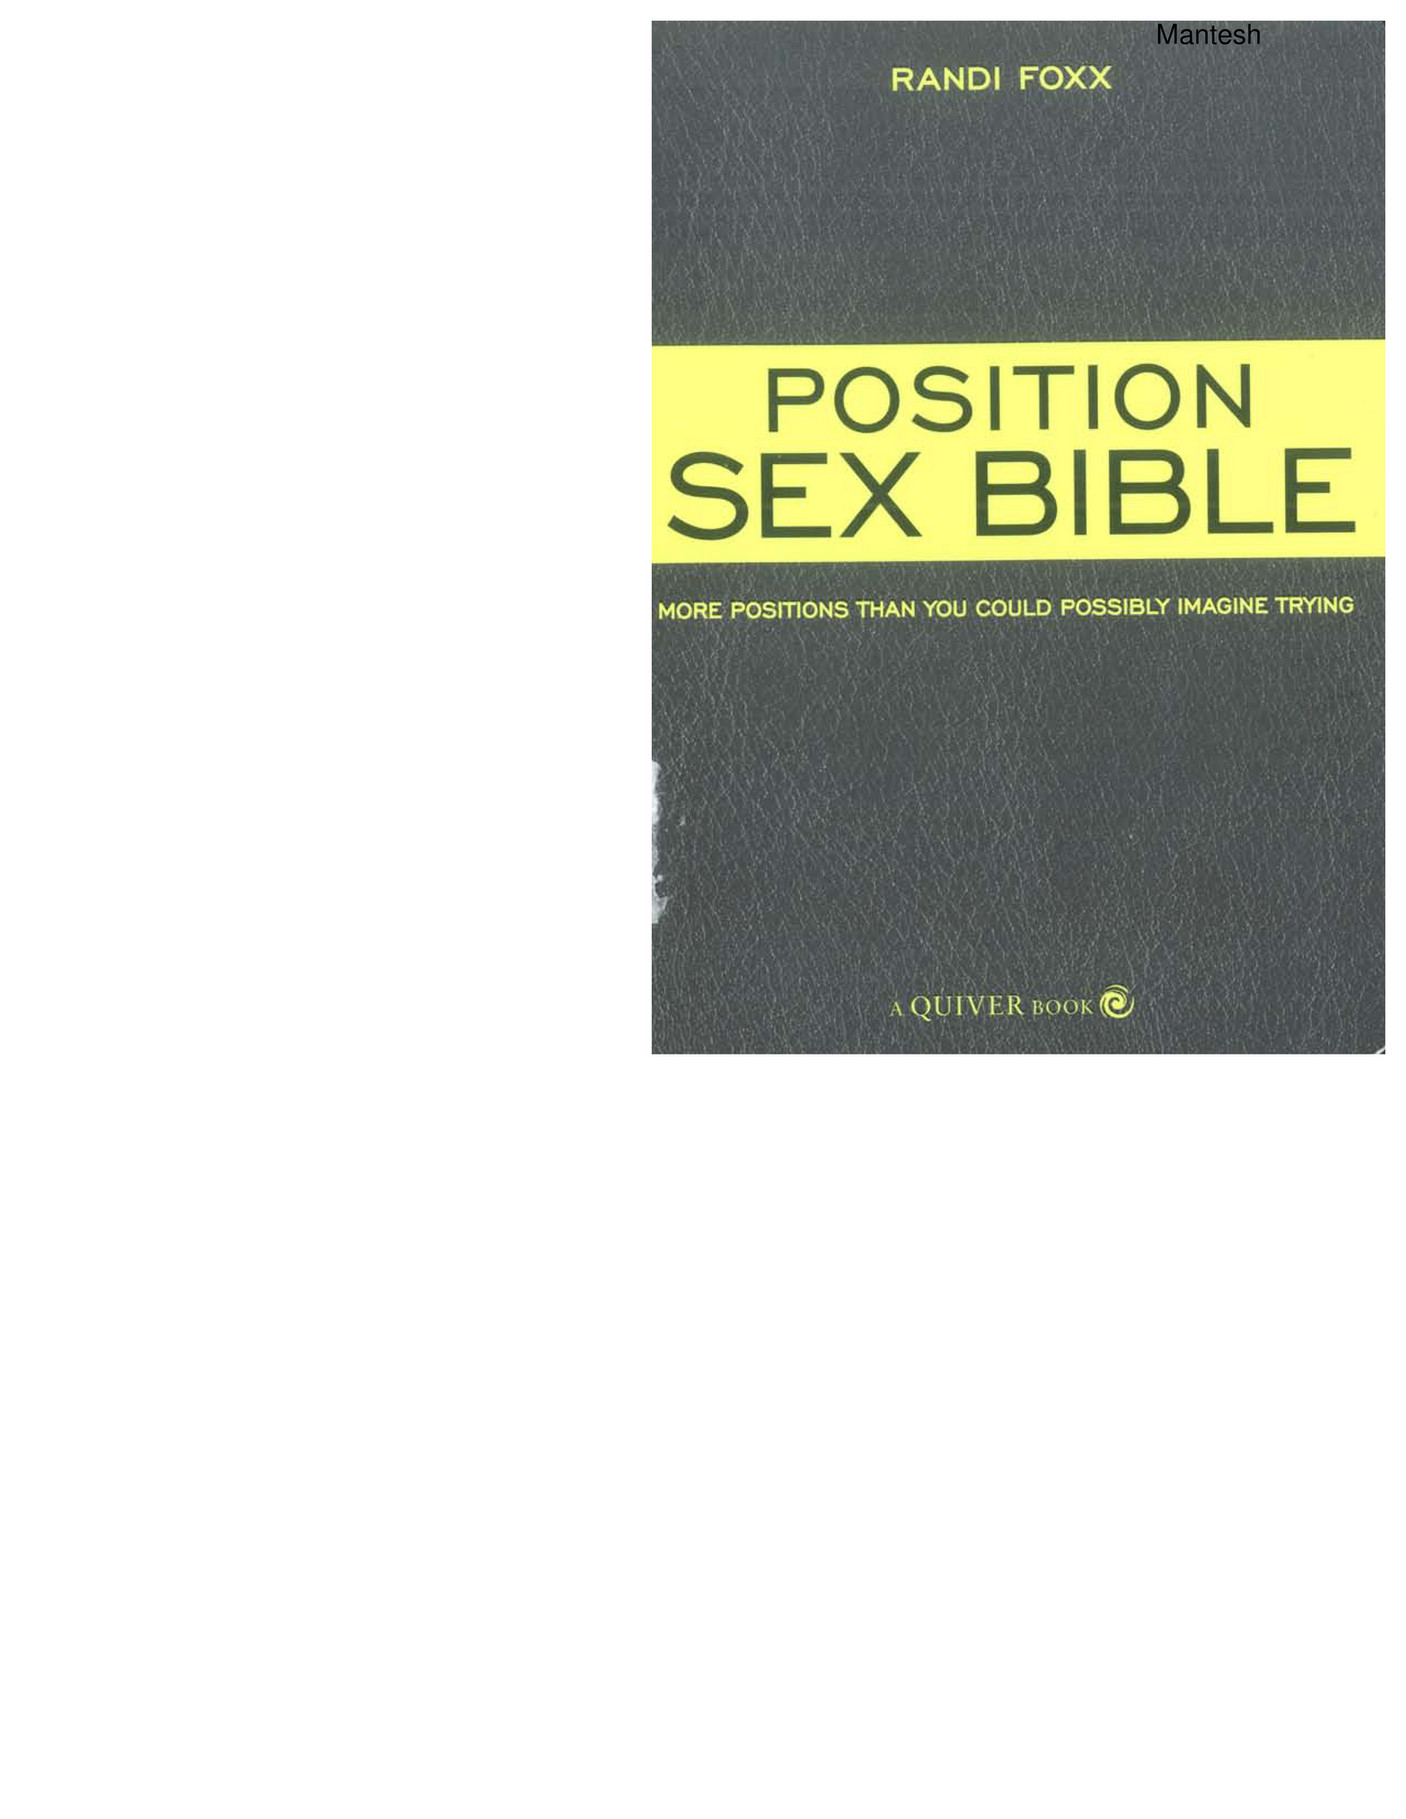 mister-apex-the-sex-position-bible-page-1-created-with-publitas